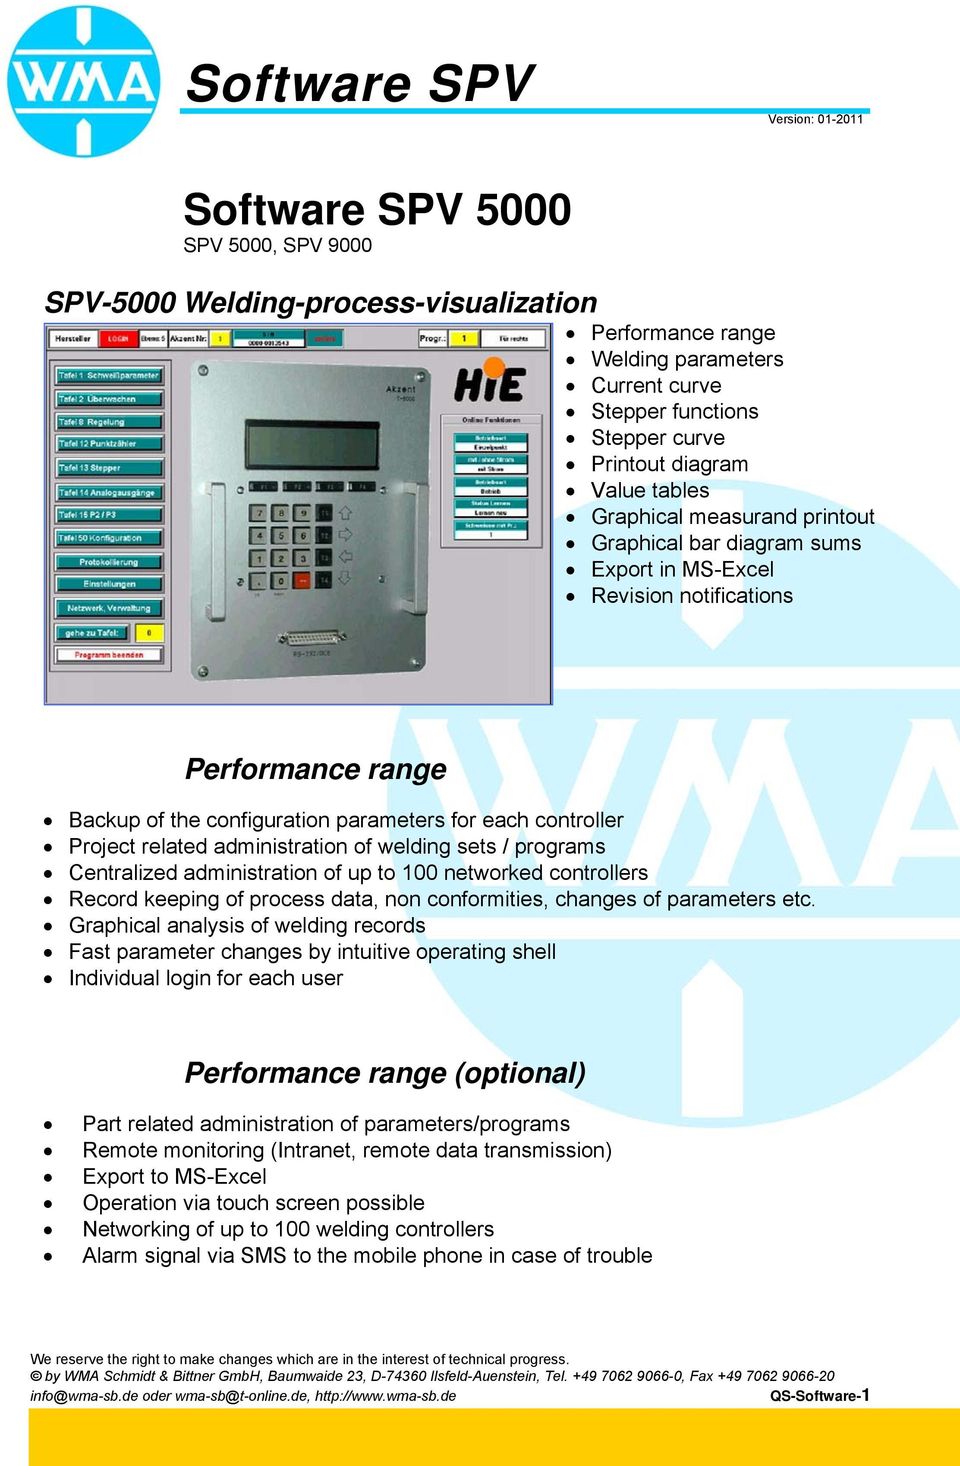 welding sets / programs Centralized administration of up to 100 networked controllers Record keeping of process data, non conformities, changes of parameters etc.